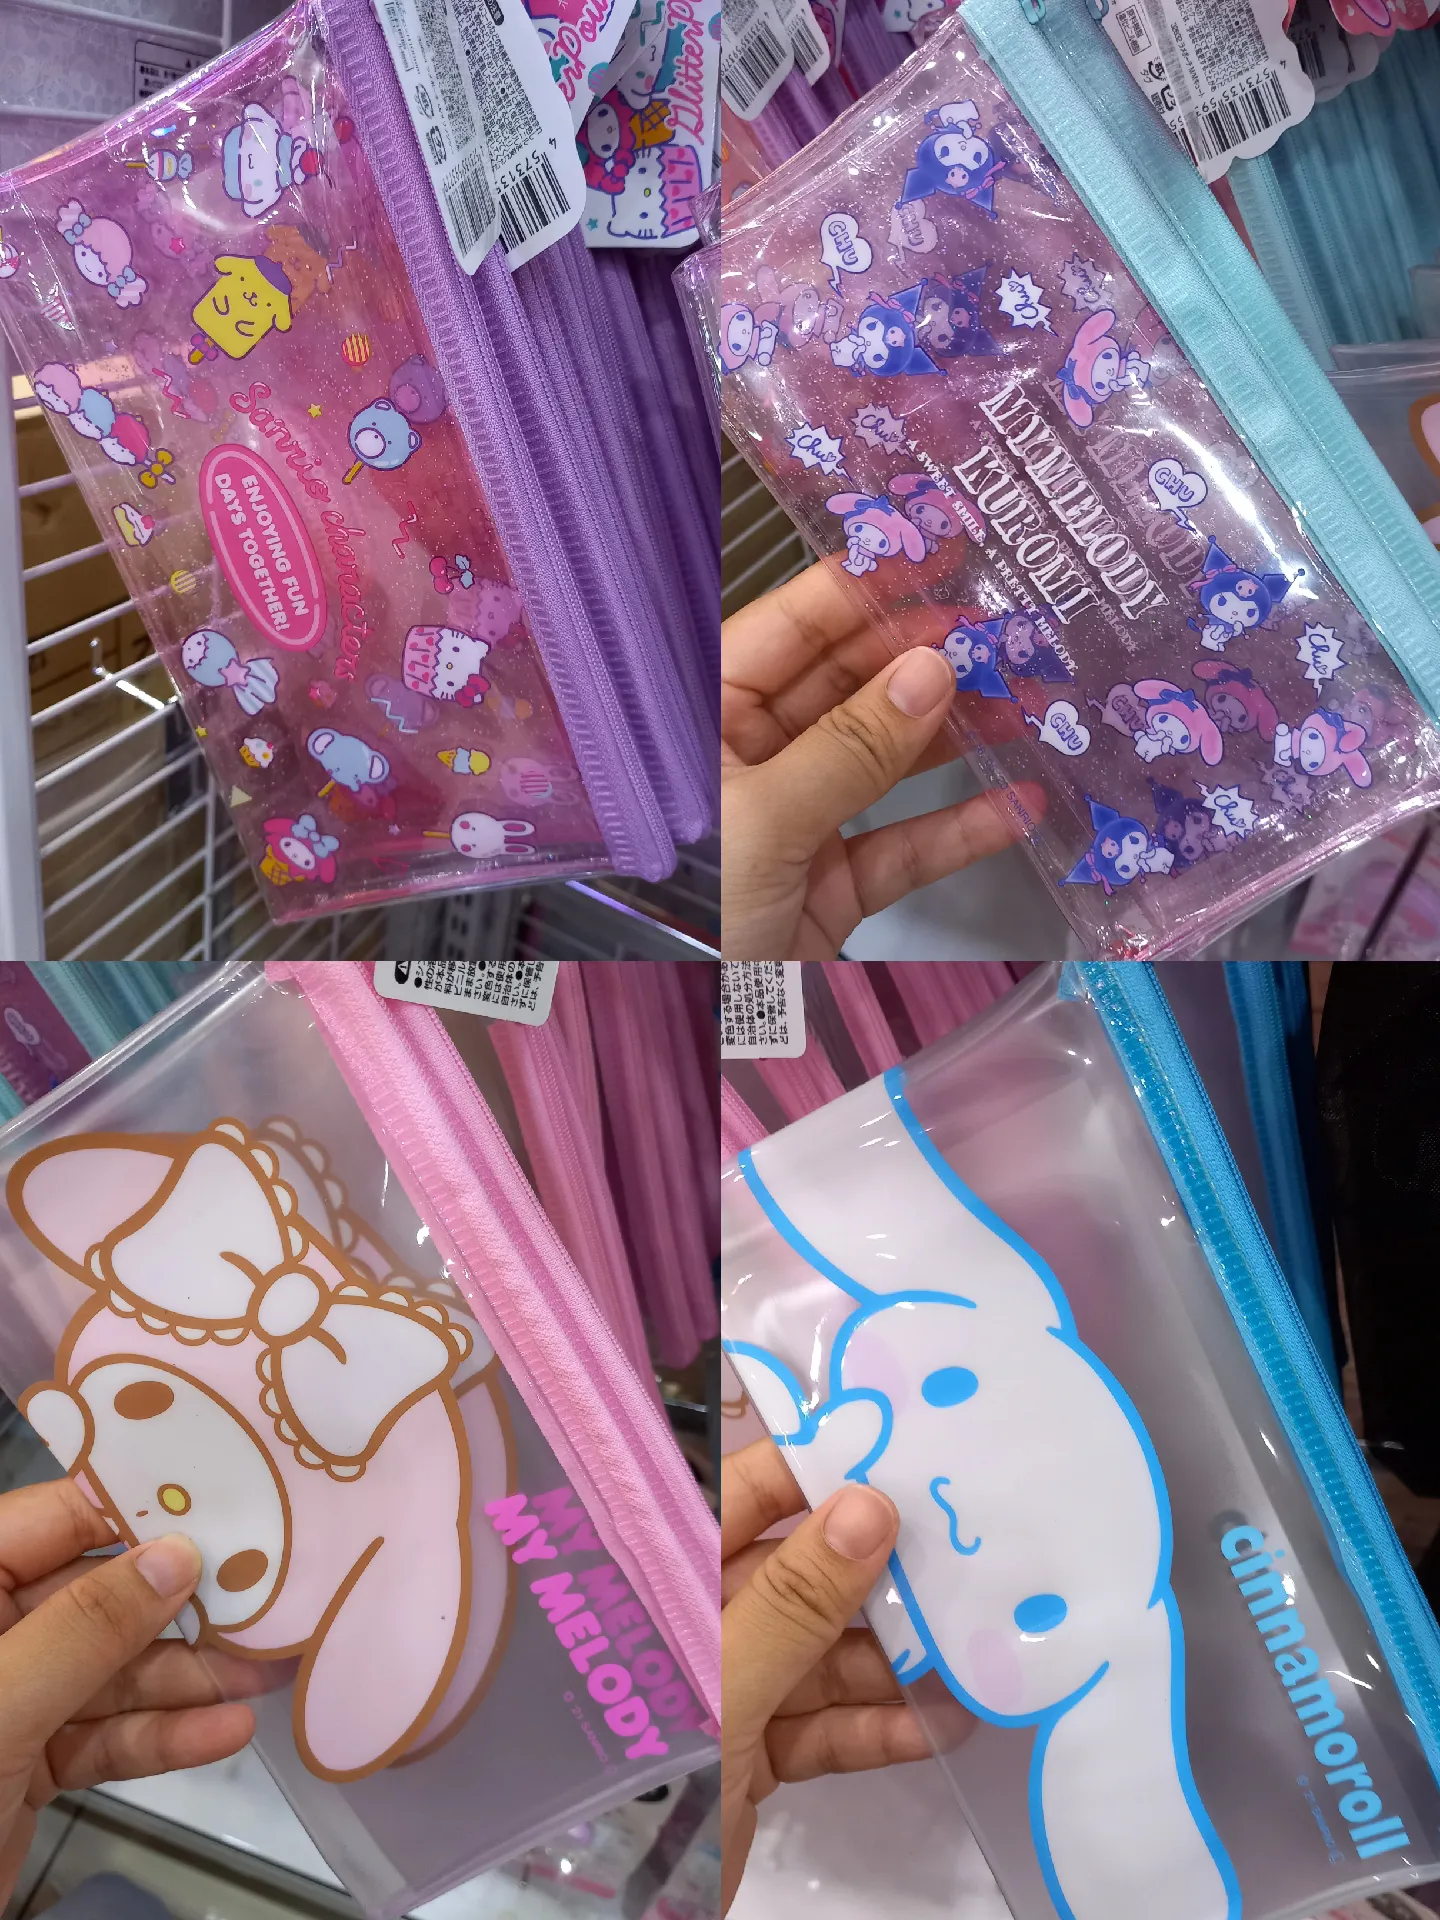 Daiso x Sanrio interesting finds!, Gallery posted by Crystal